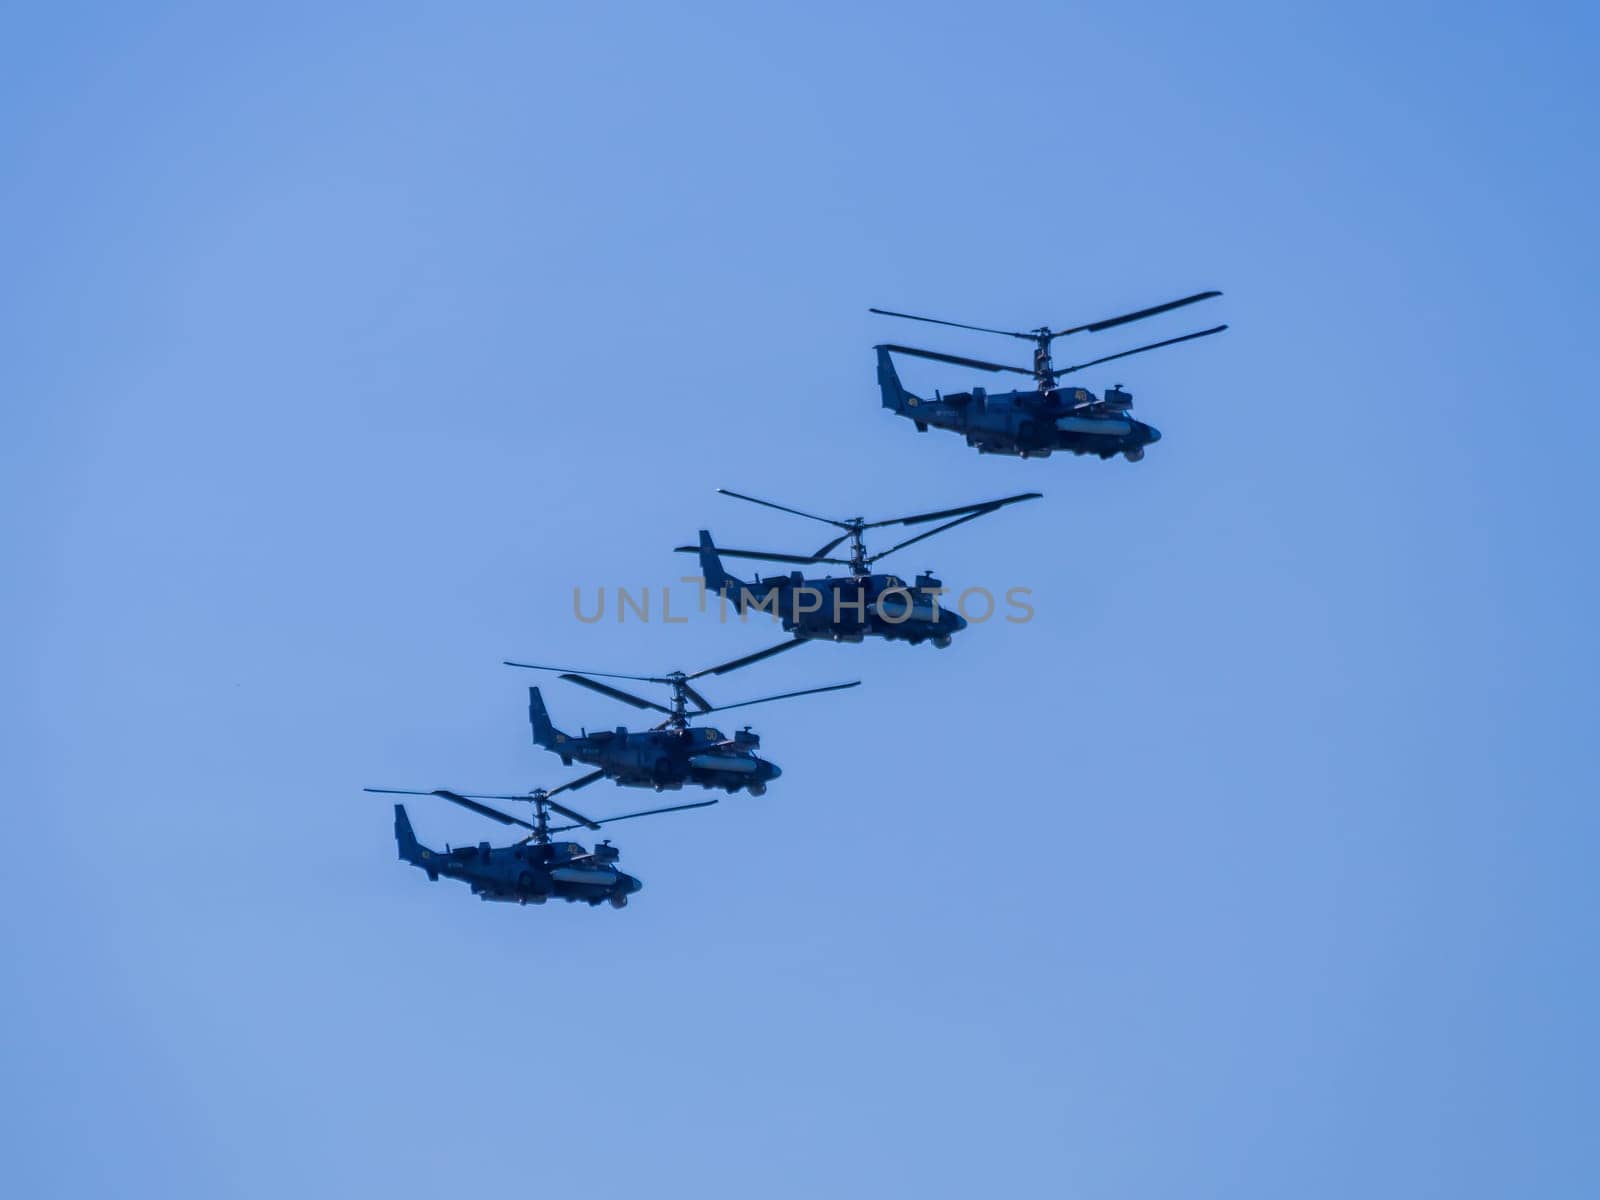 Russia, St. Petersburg - June 24, 2020: Russian military helicopters alligator Ка-52 of the Russian Air Force in flight at the Victory Parade in World War II.